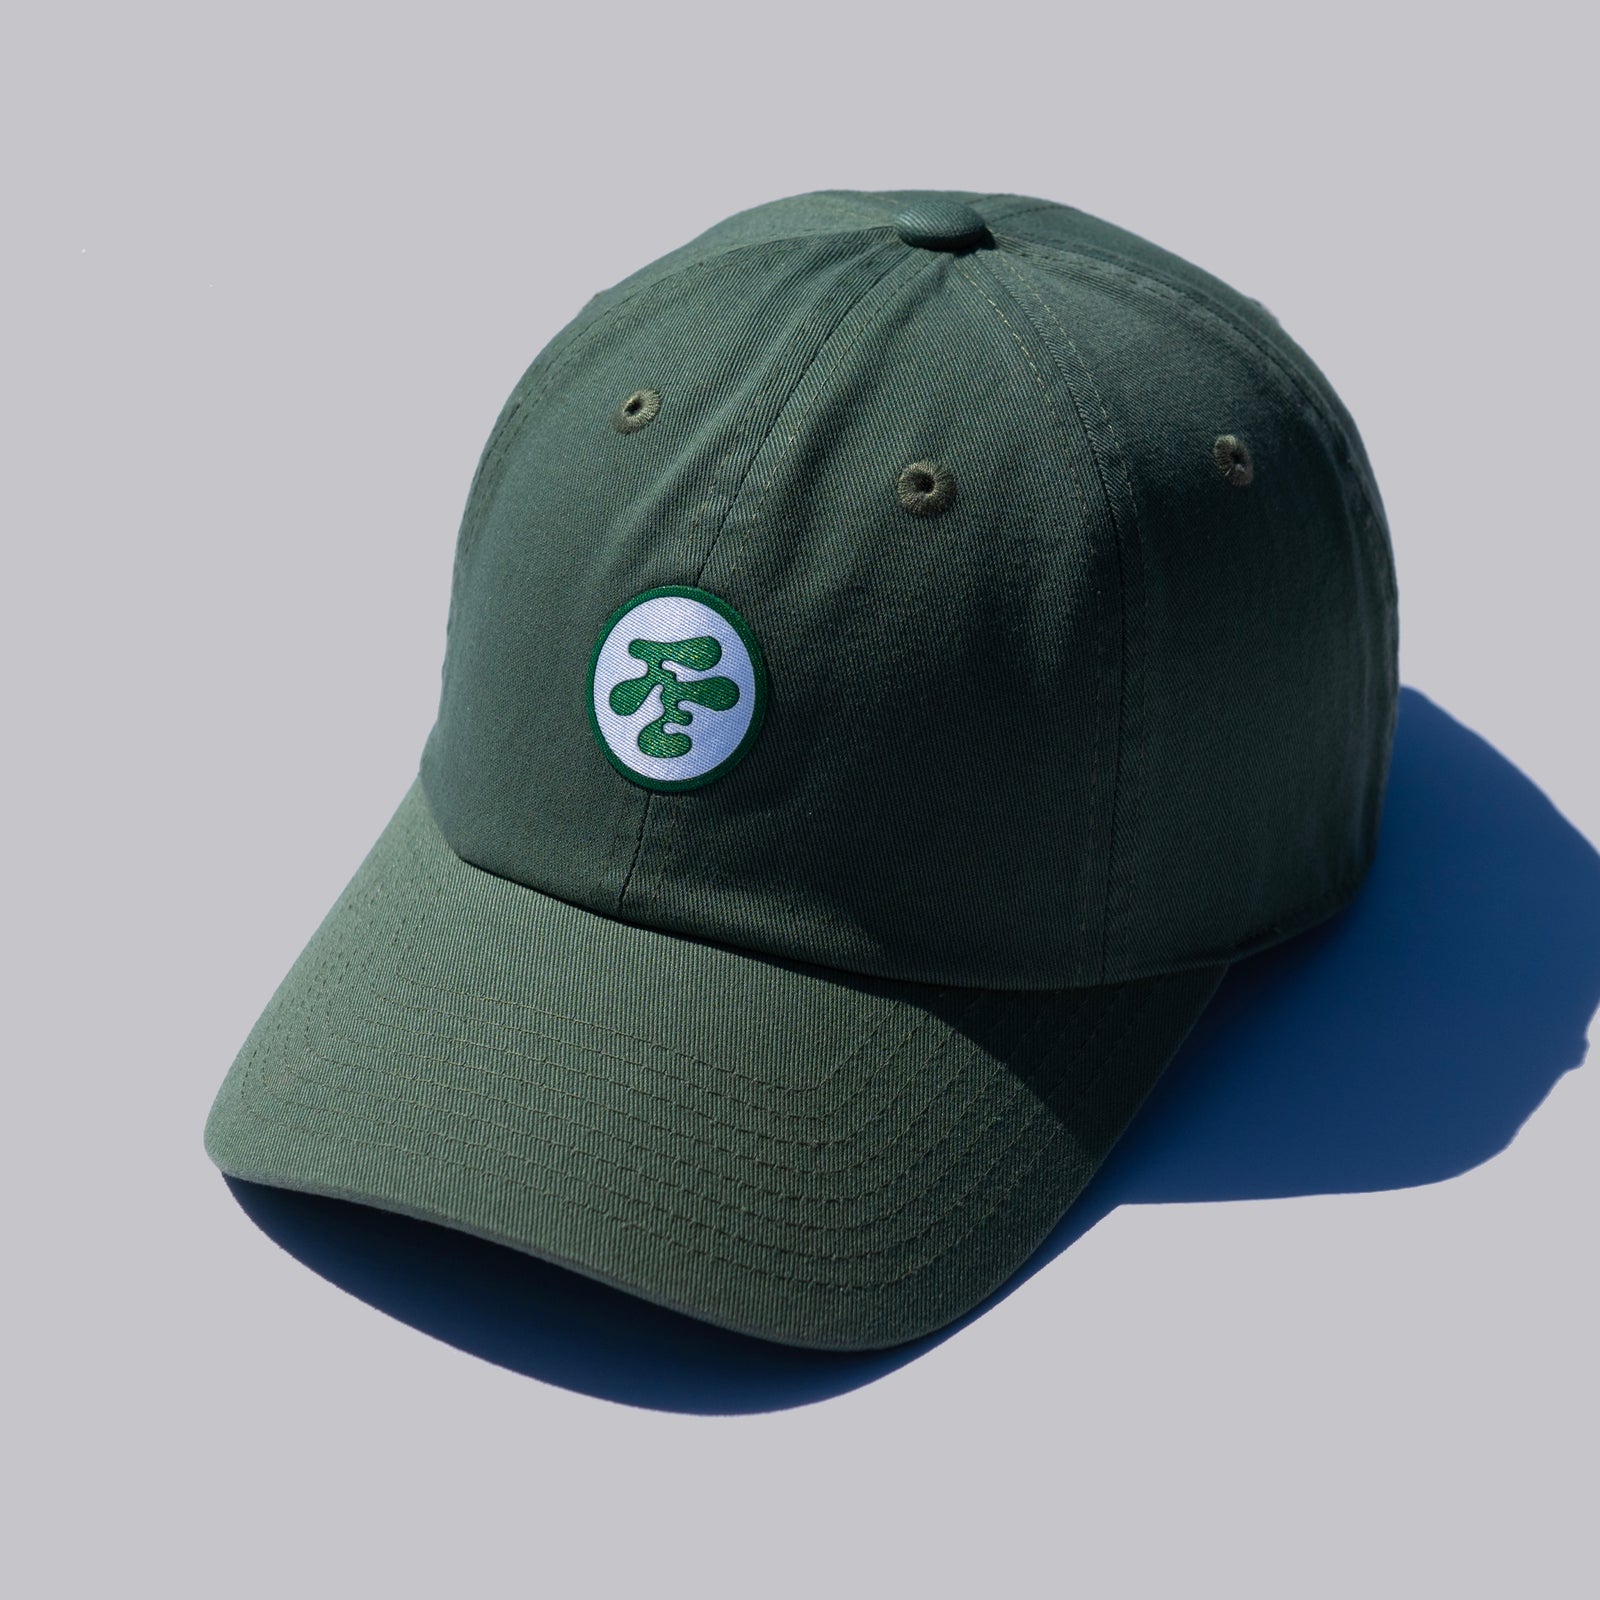 Golf Hats: Performance Caps, Visors, and More - Fried Egg Golf